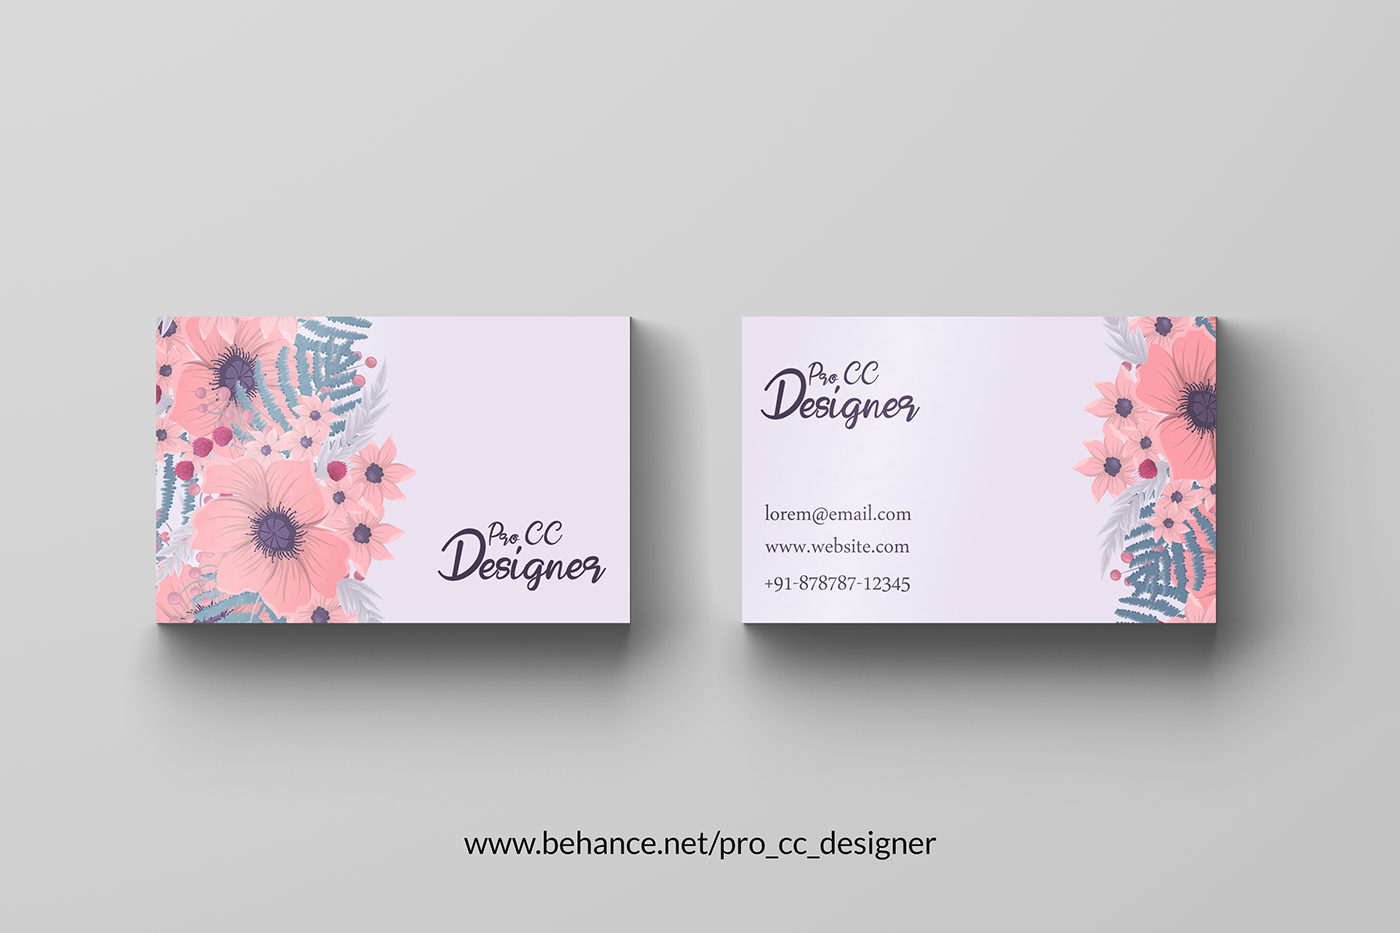 free business card mockup download business card mockup business card download psd Business Card PSD mockup psd download psd download free